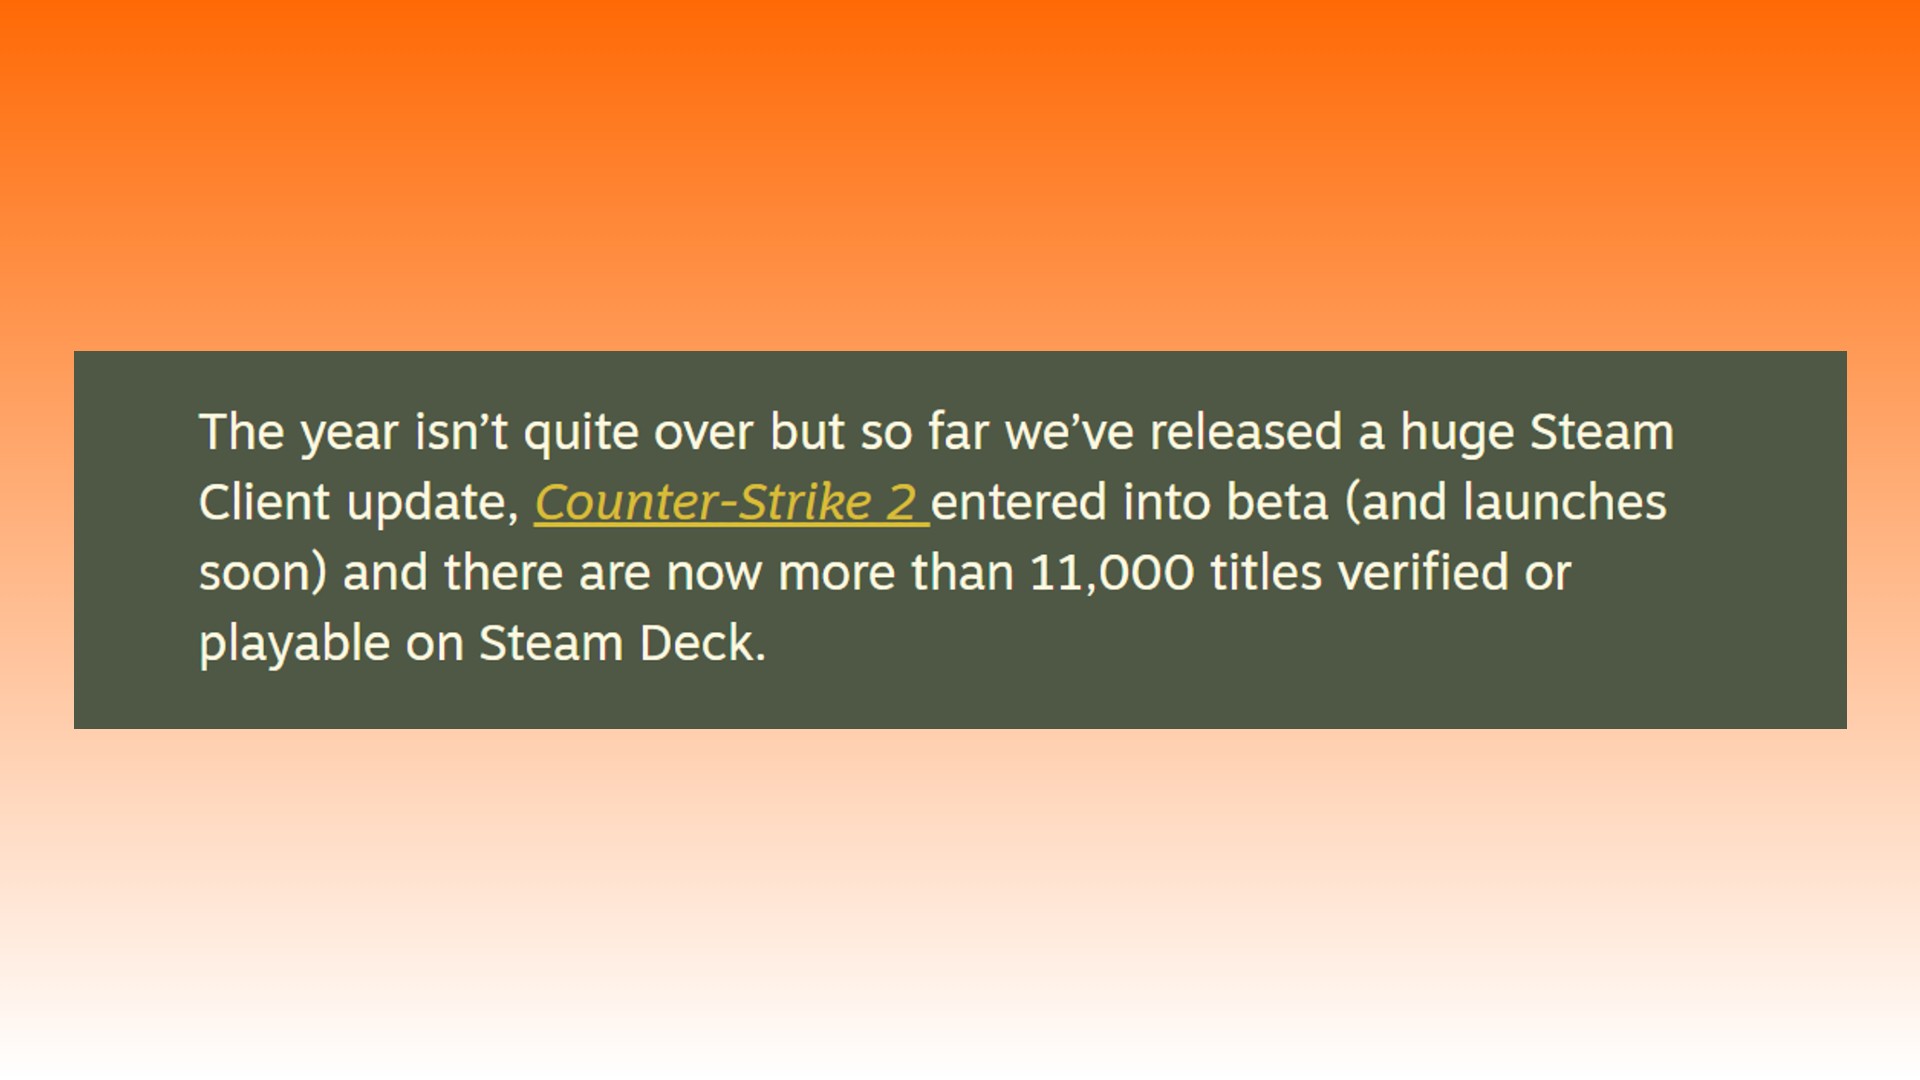 Counter-Strike 2' is launching soon, according to Steam post